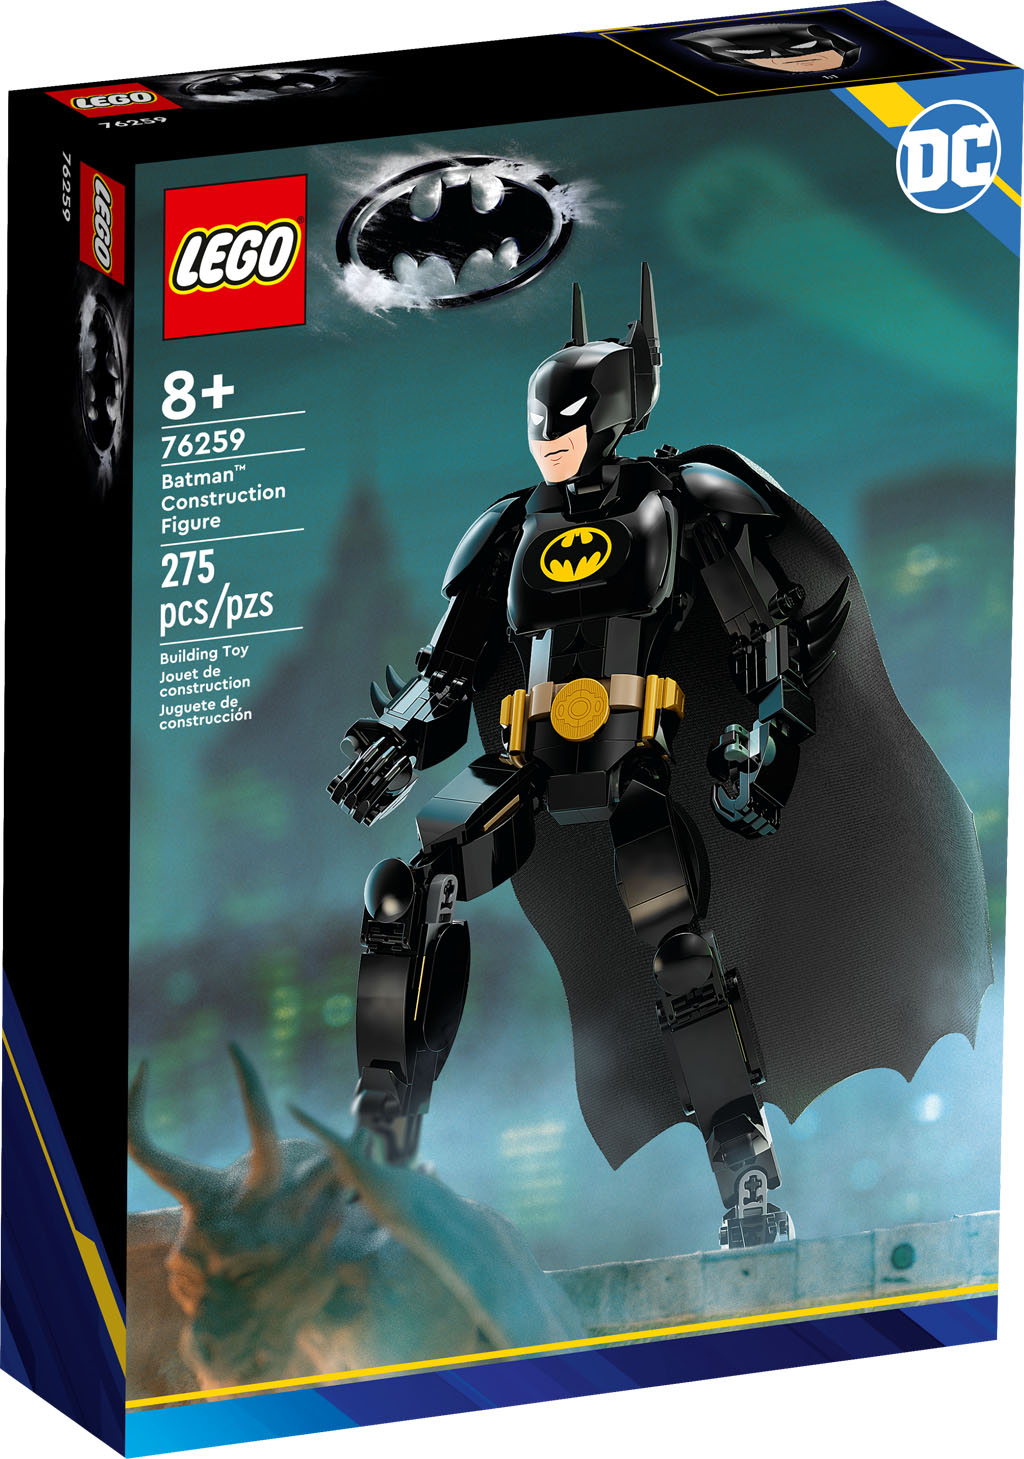 More sets from The LEGO Batman Movie revealed [News] - The